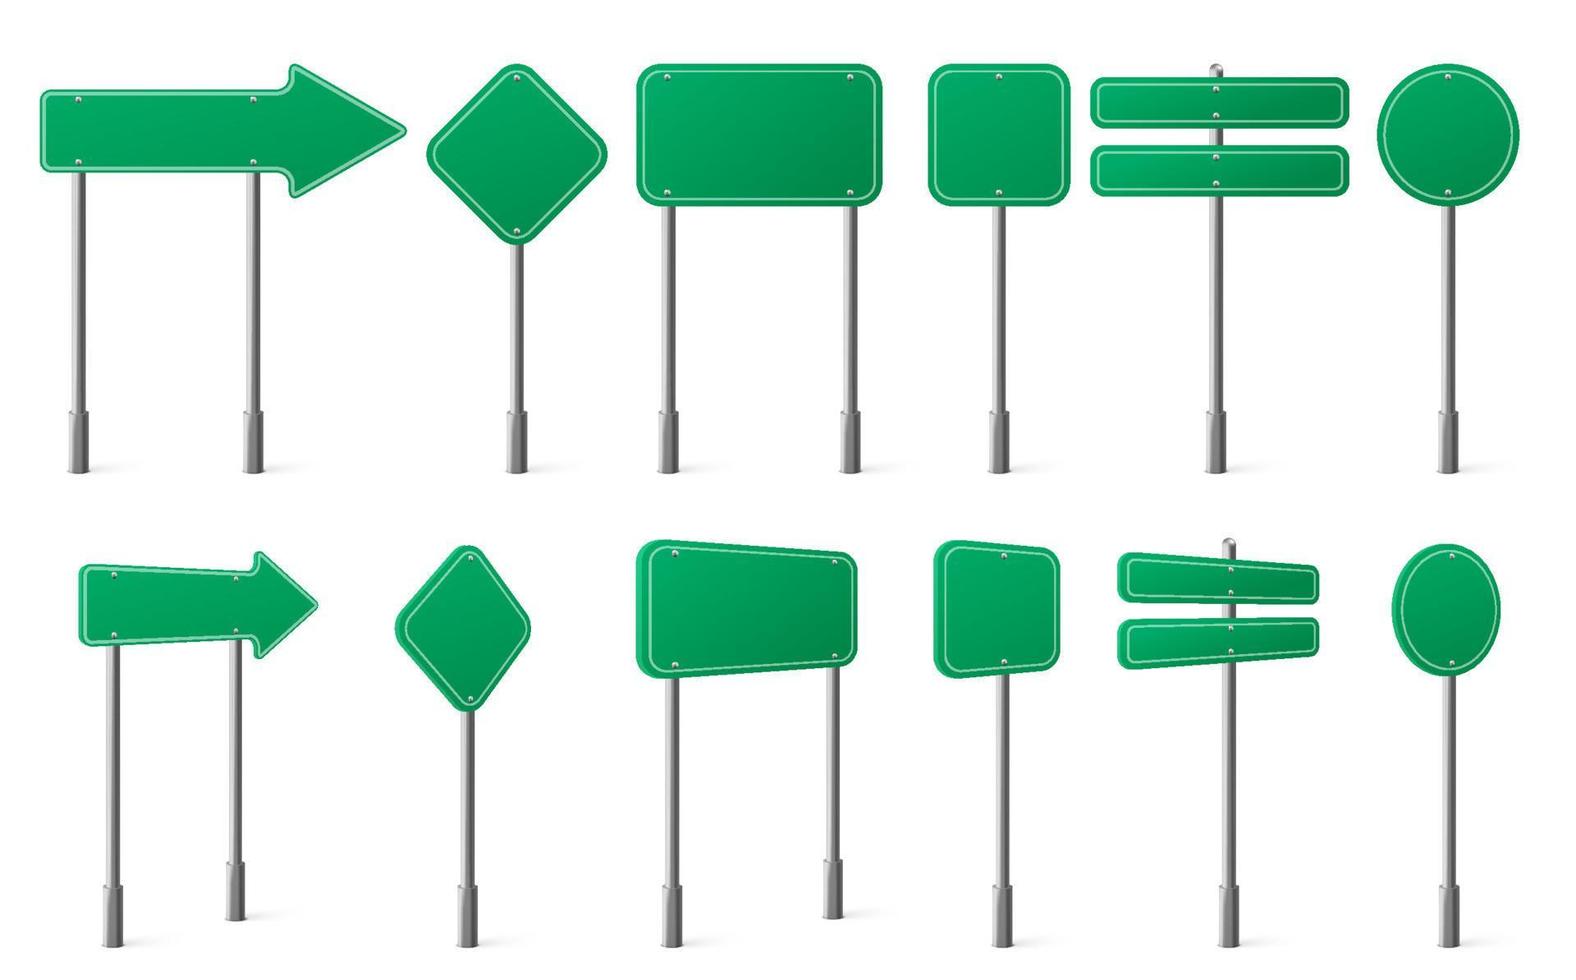 Green road signs different shapes on metal post vector